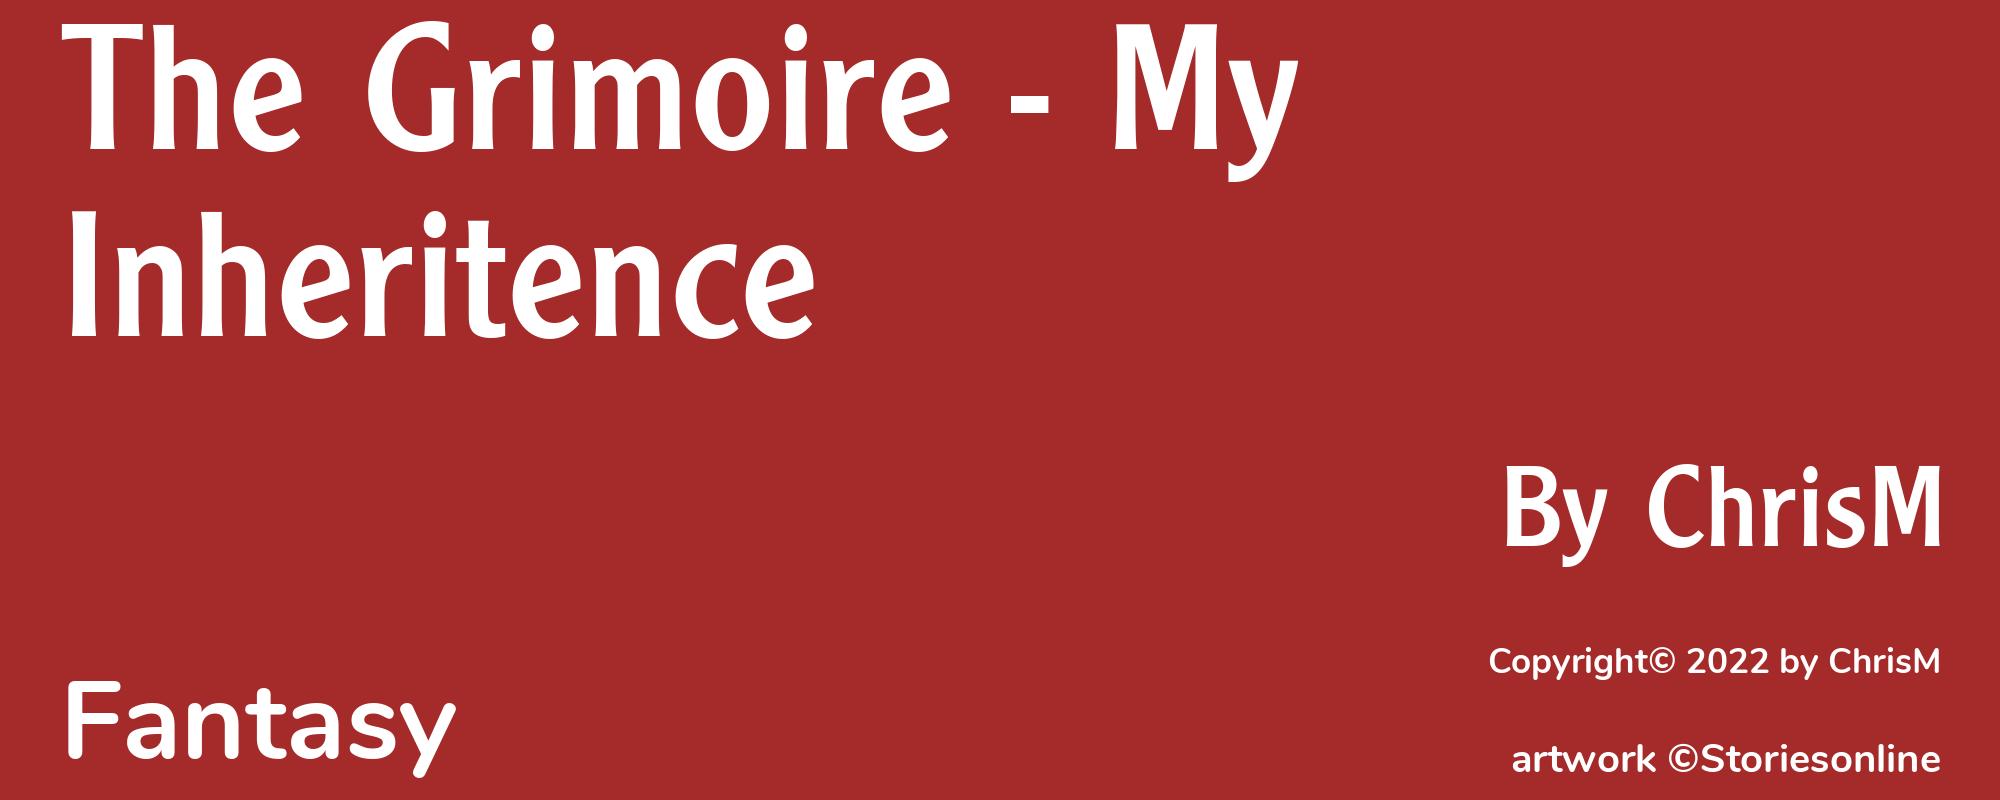 The Grimoire - My Inheritence - Cover